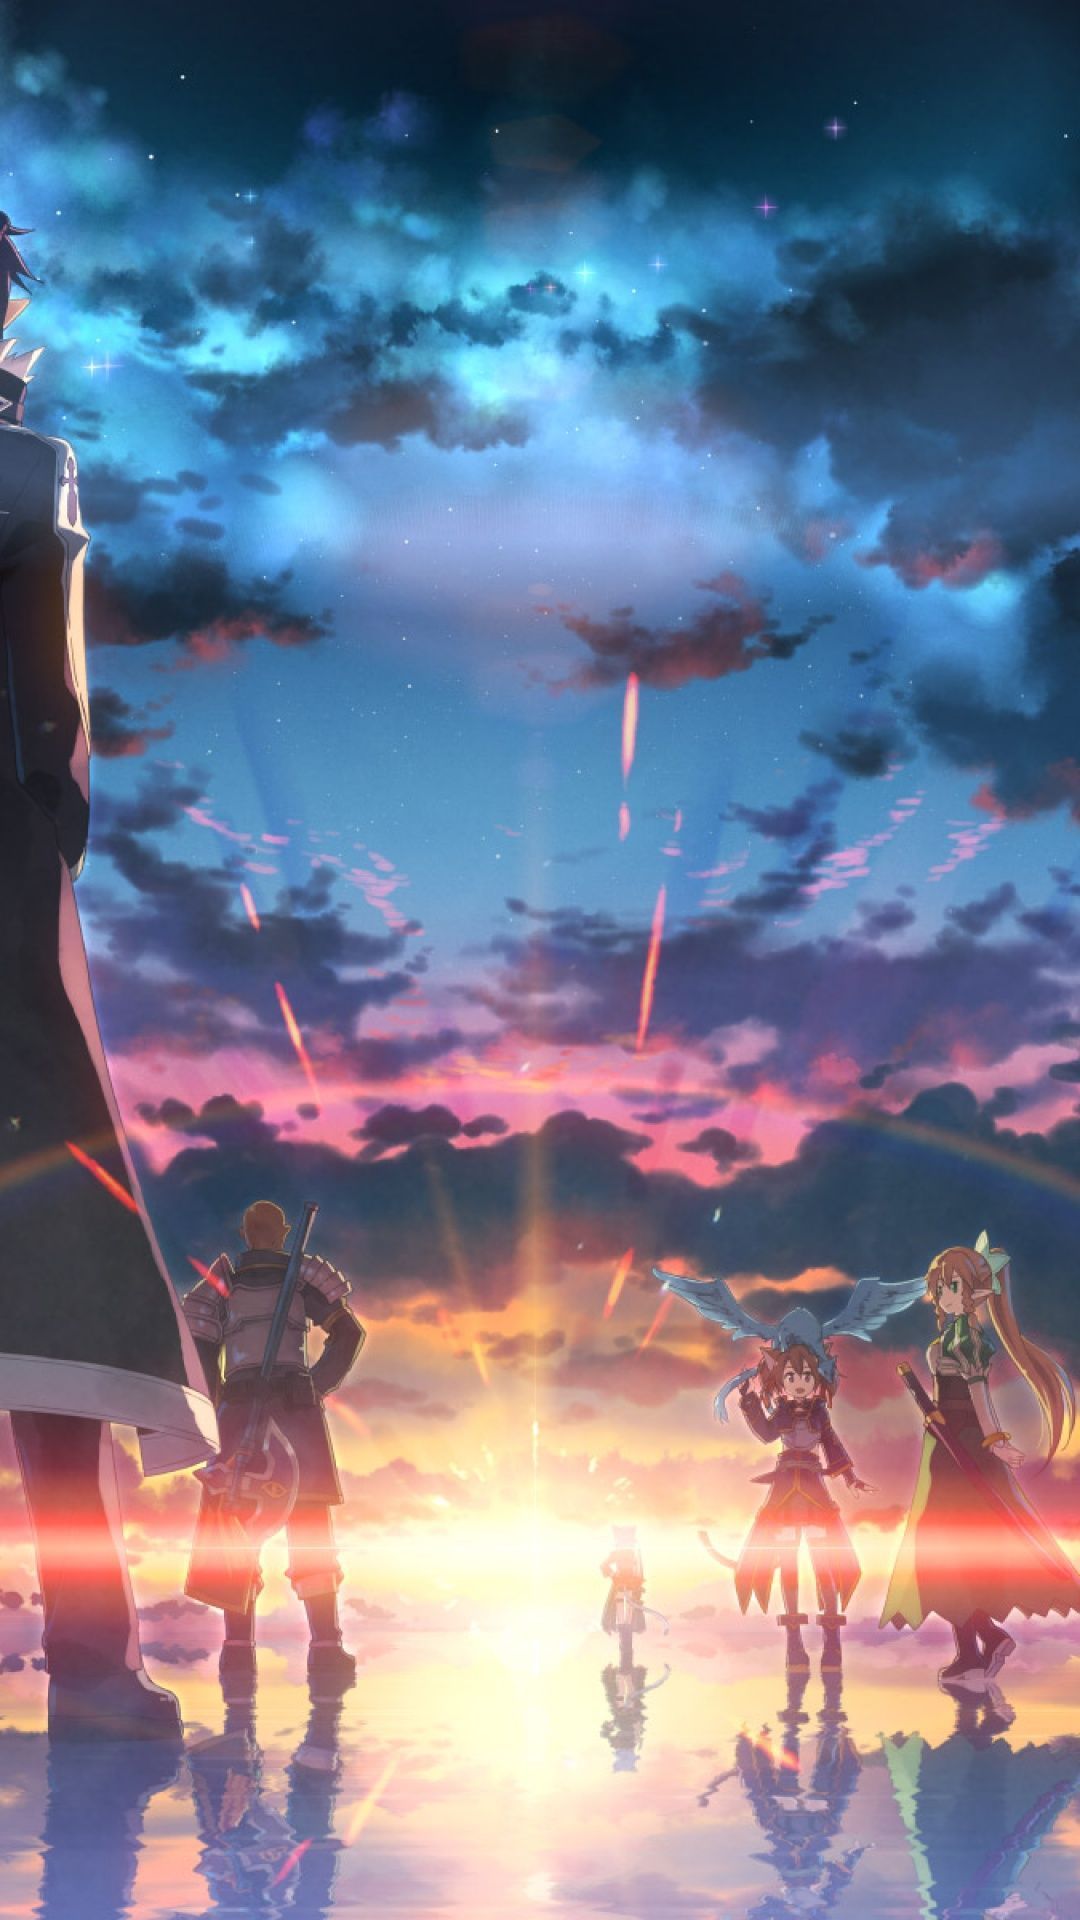 Sao Background Picture. Anime wallpaper phone, HD anime wallpaper, Sword art online wallpaper